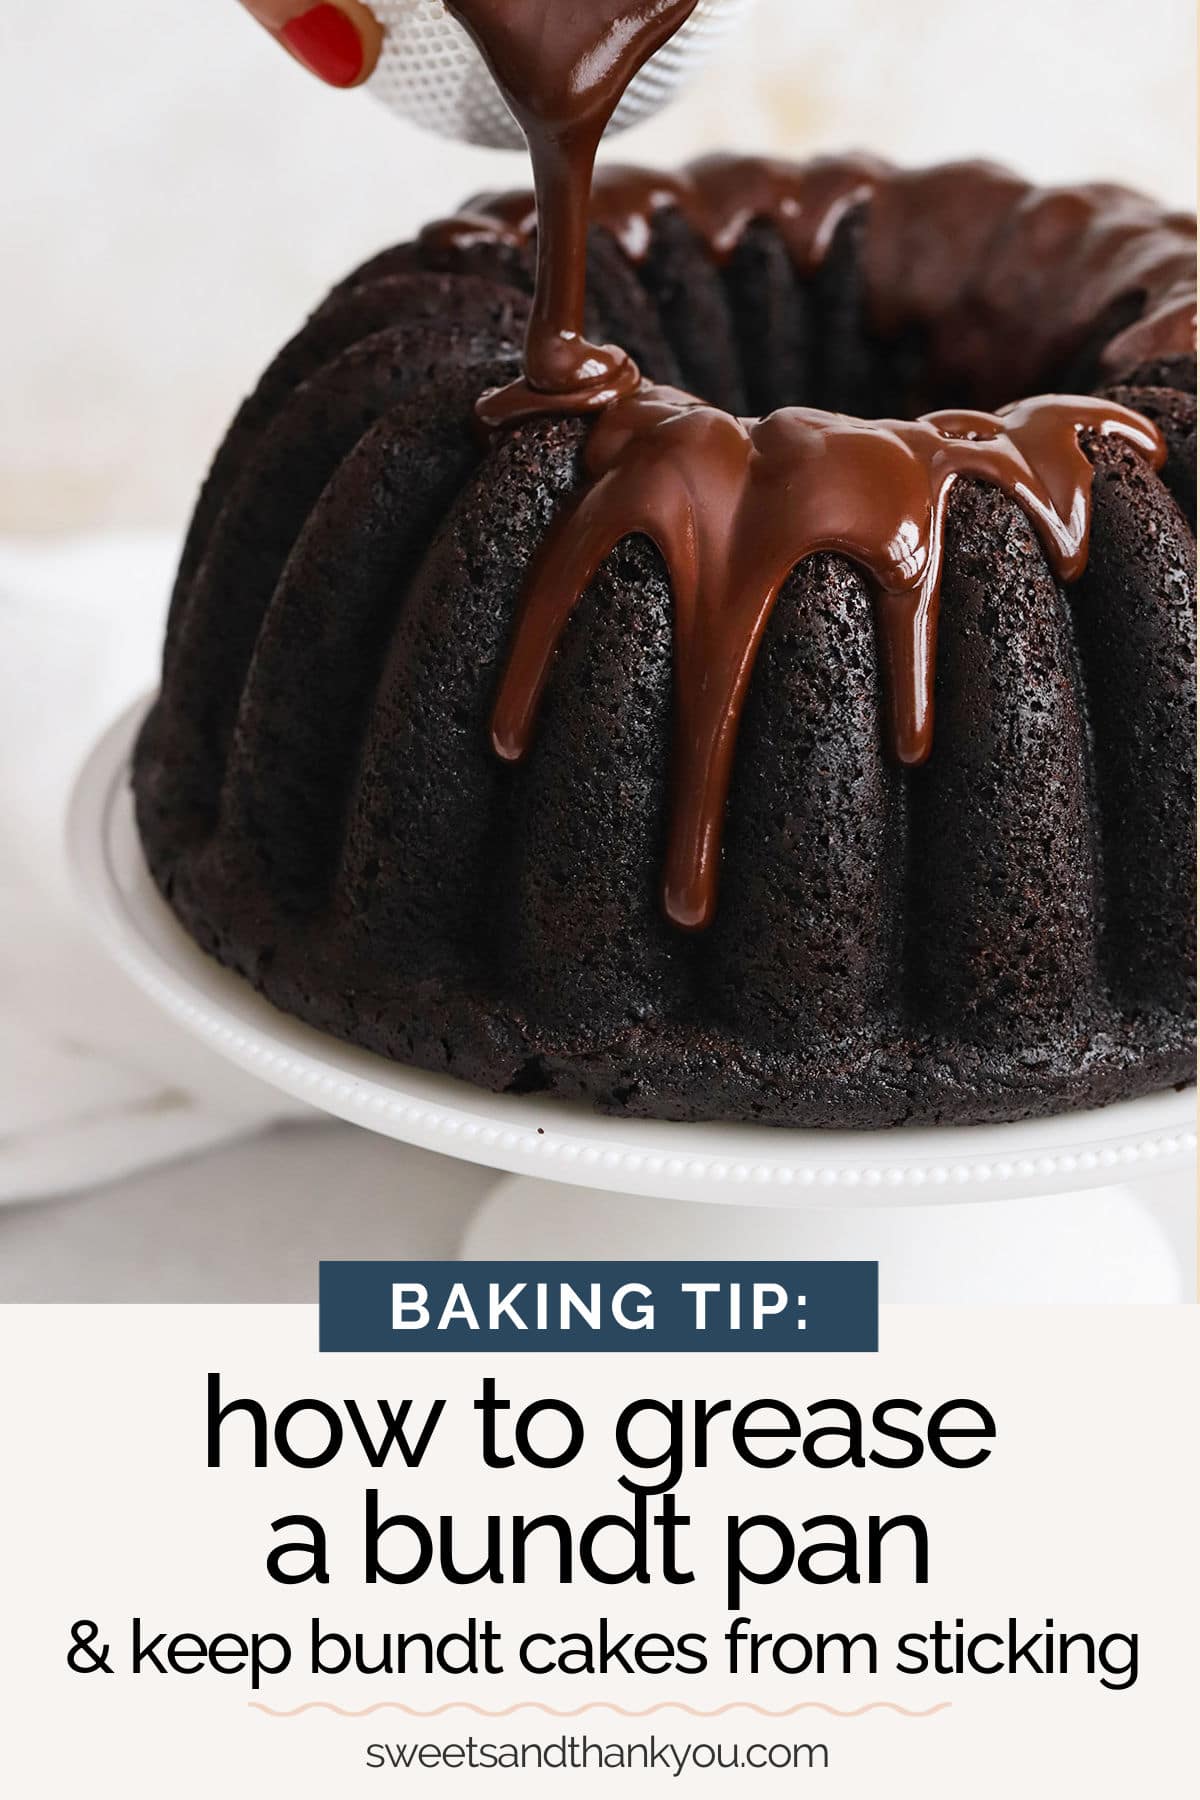 How To Grease A Bundt Pan - Learn the best way to grease your bundt pan and how to keep bundt cakes from sticking! // How to Grease Bundt Pans // How to prevent bundt cakes from sticking // how to prep bundt pans // baking tip // how to grease a cake pan // cake pan tips // gluten free baking // gluten free cake